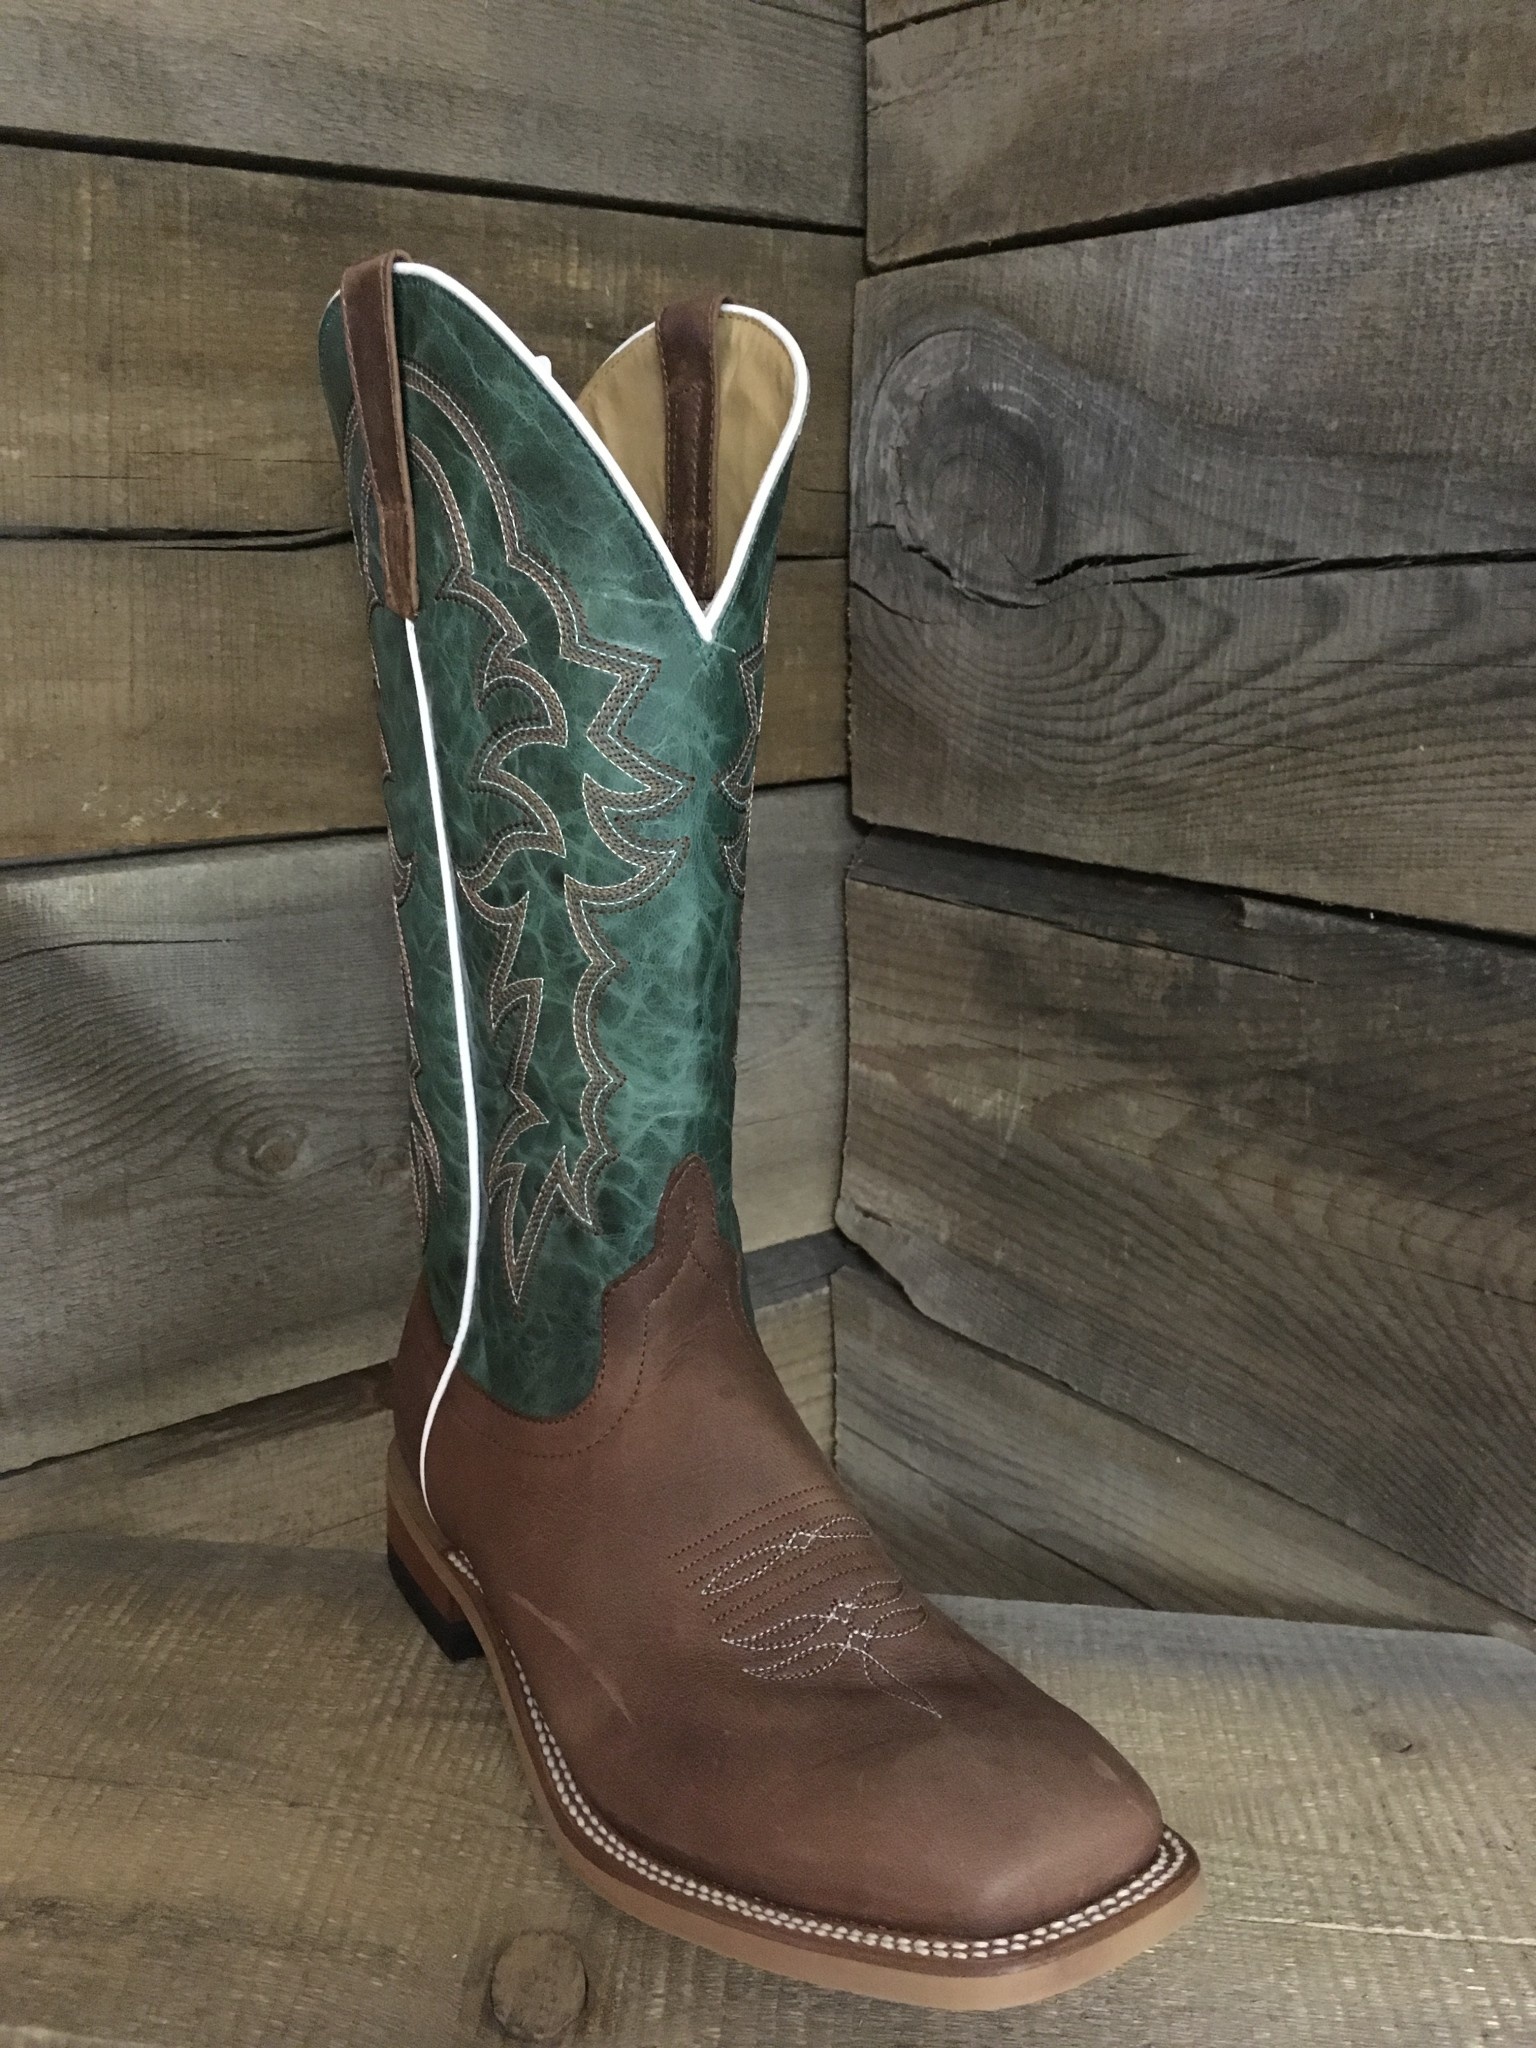 Men's Horse Power Sugared Honey Cowboy Boots - Brown/Green